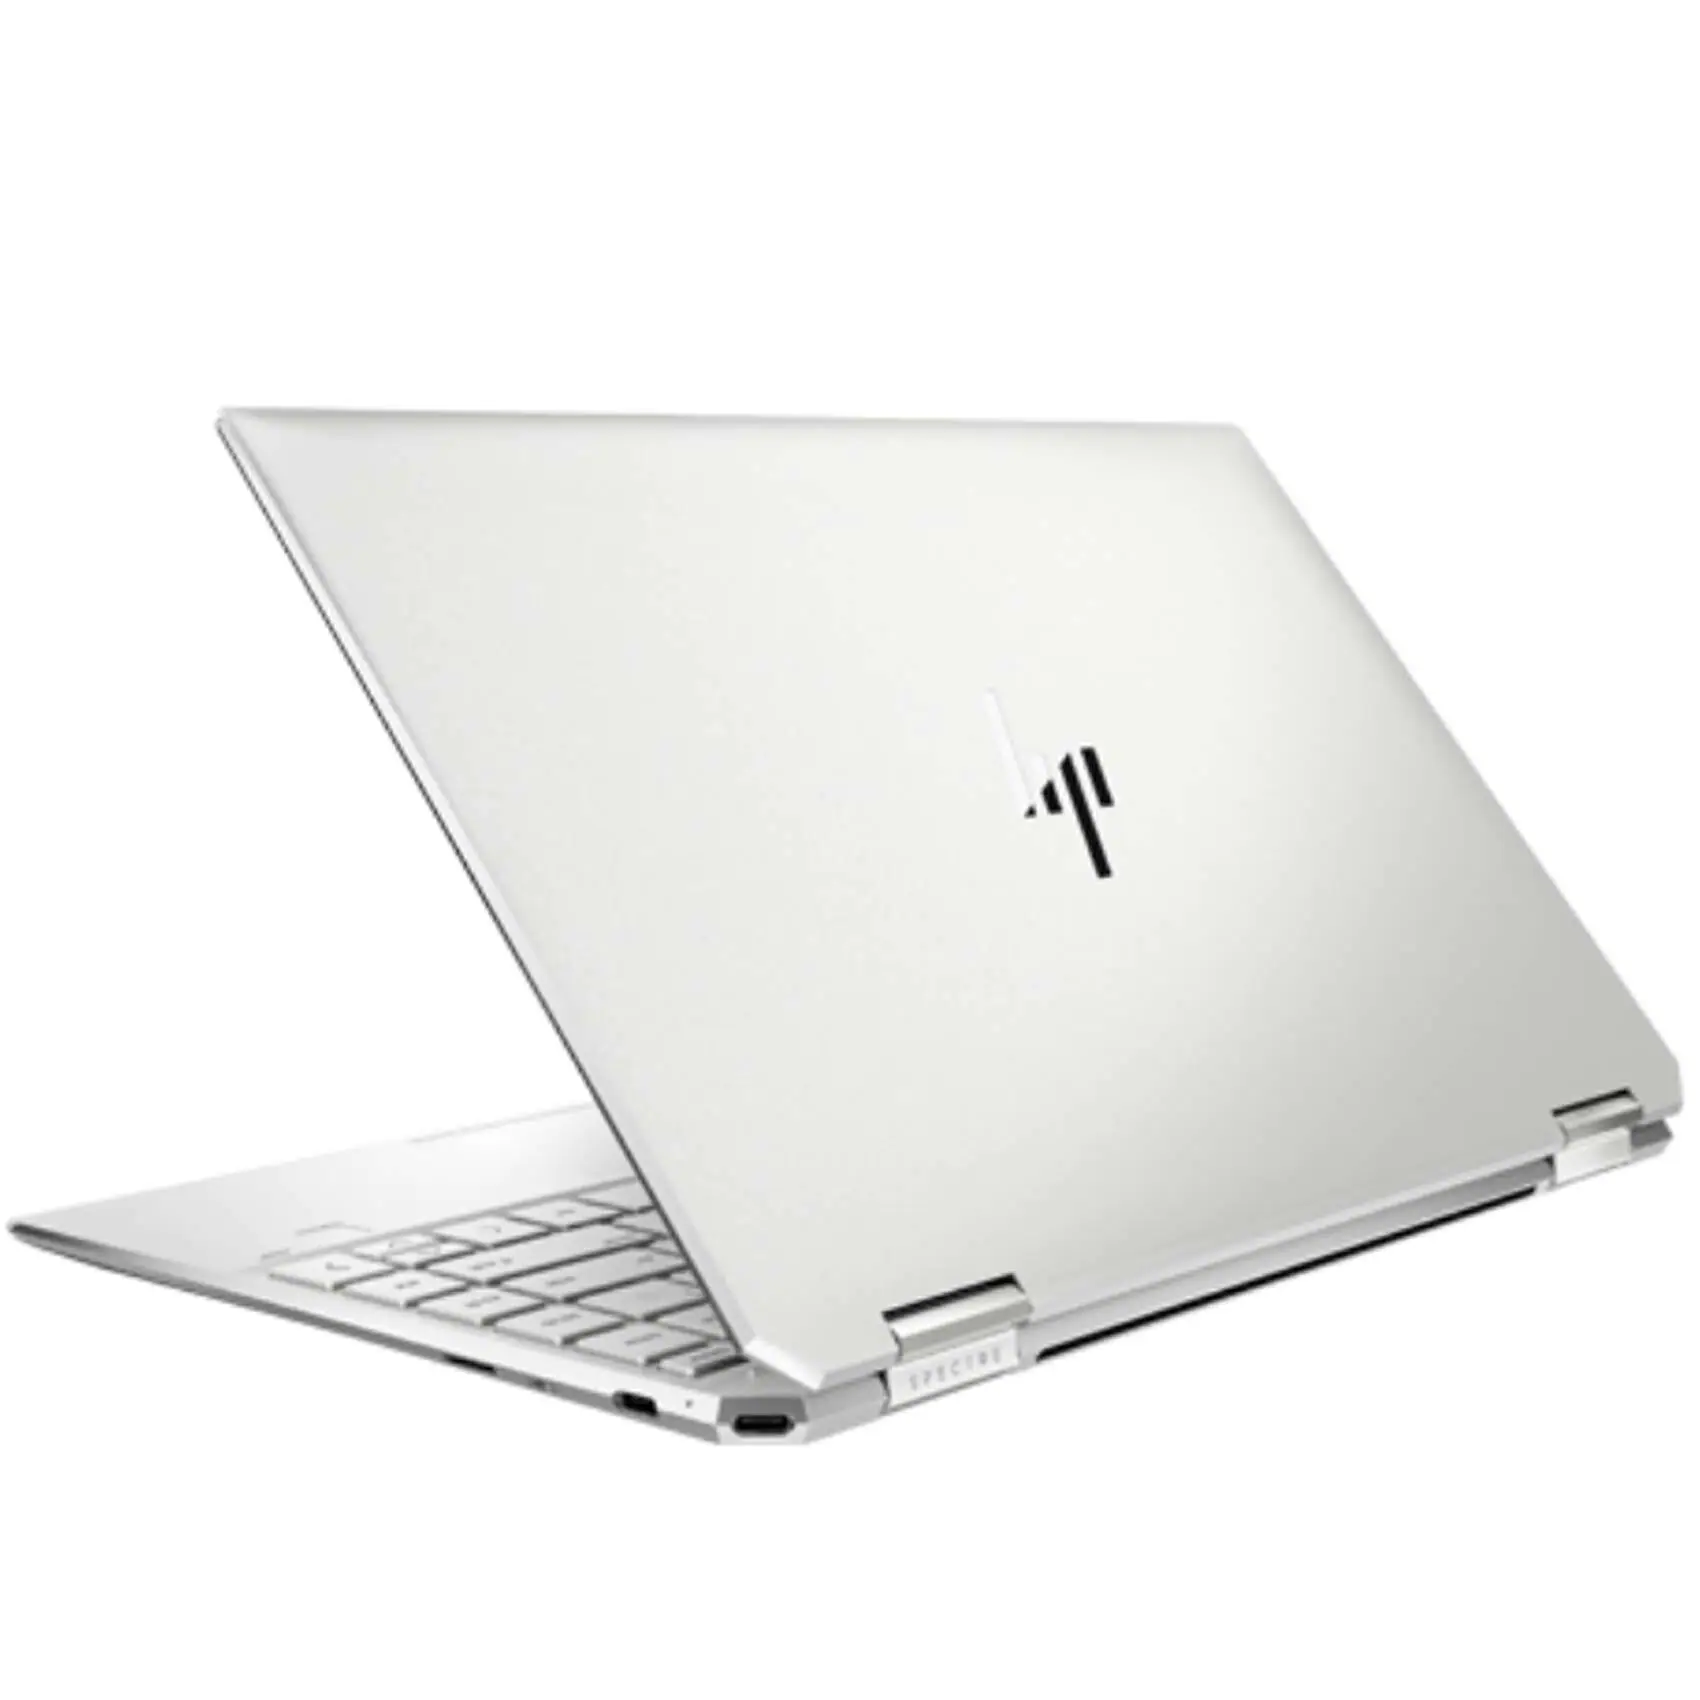 Laptops Promotions offer - in Amman #2065 - 1  image 